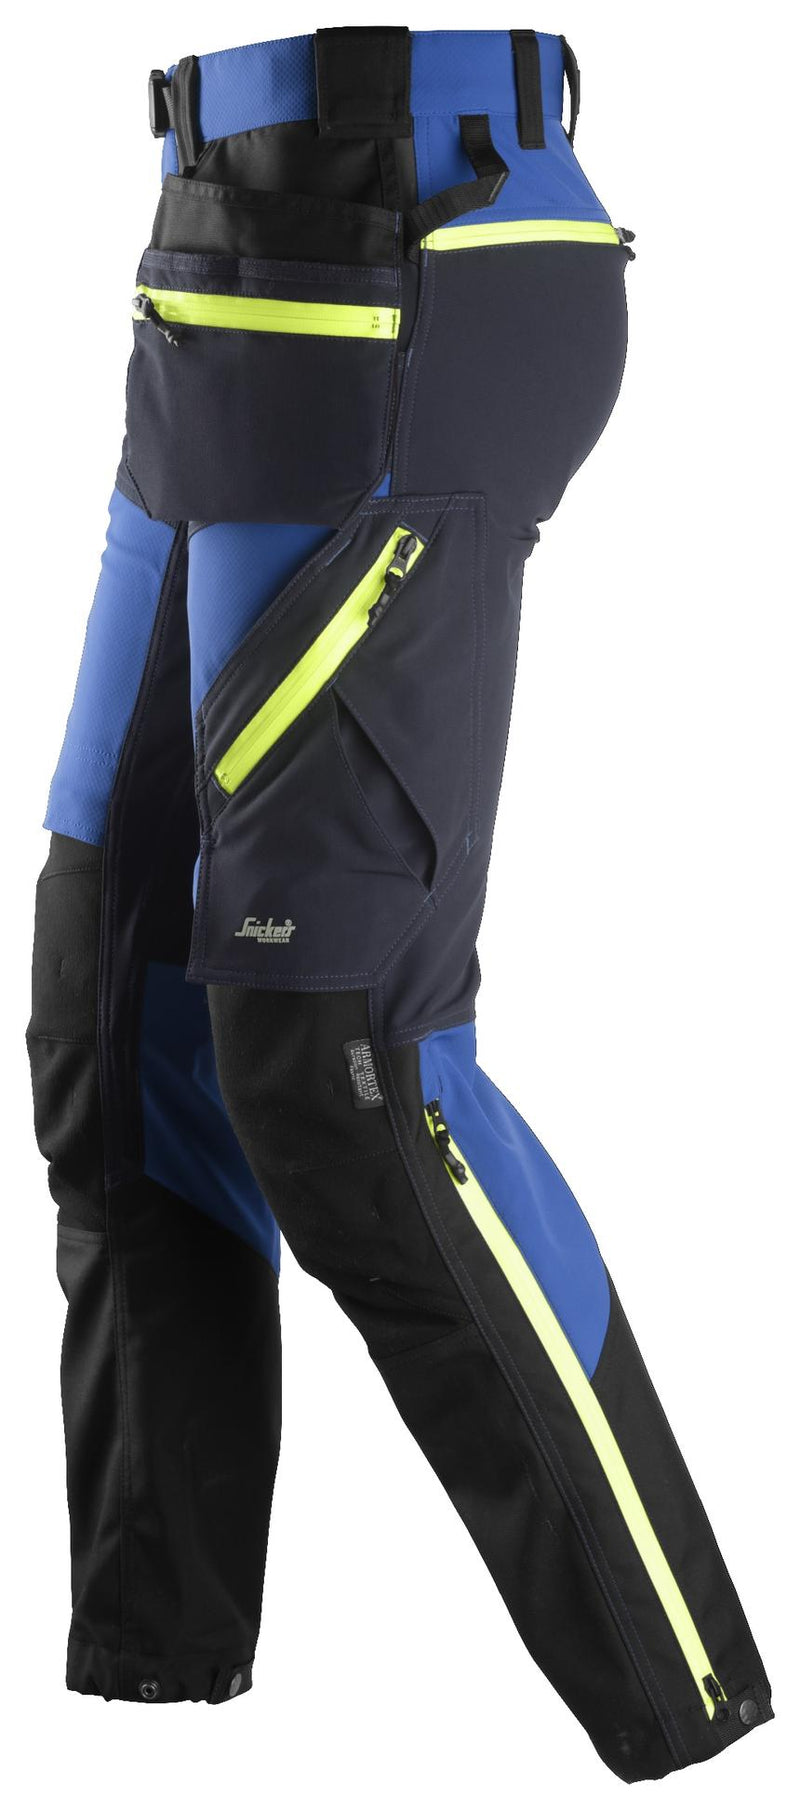 Snickers Workwear 6940 FlexiWork Softshell Stretch Trousers + Holster Pockets - True Blue/Navy